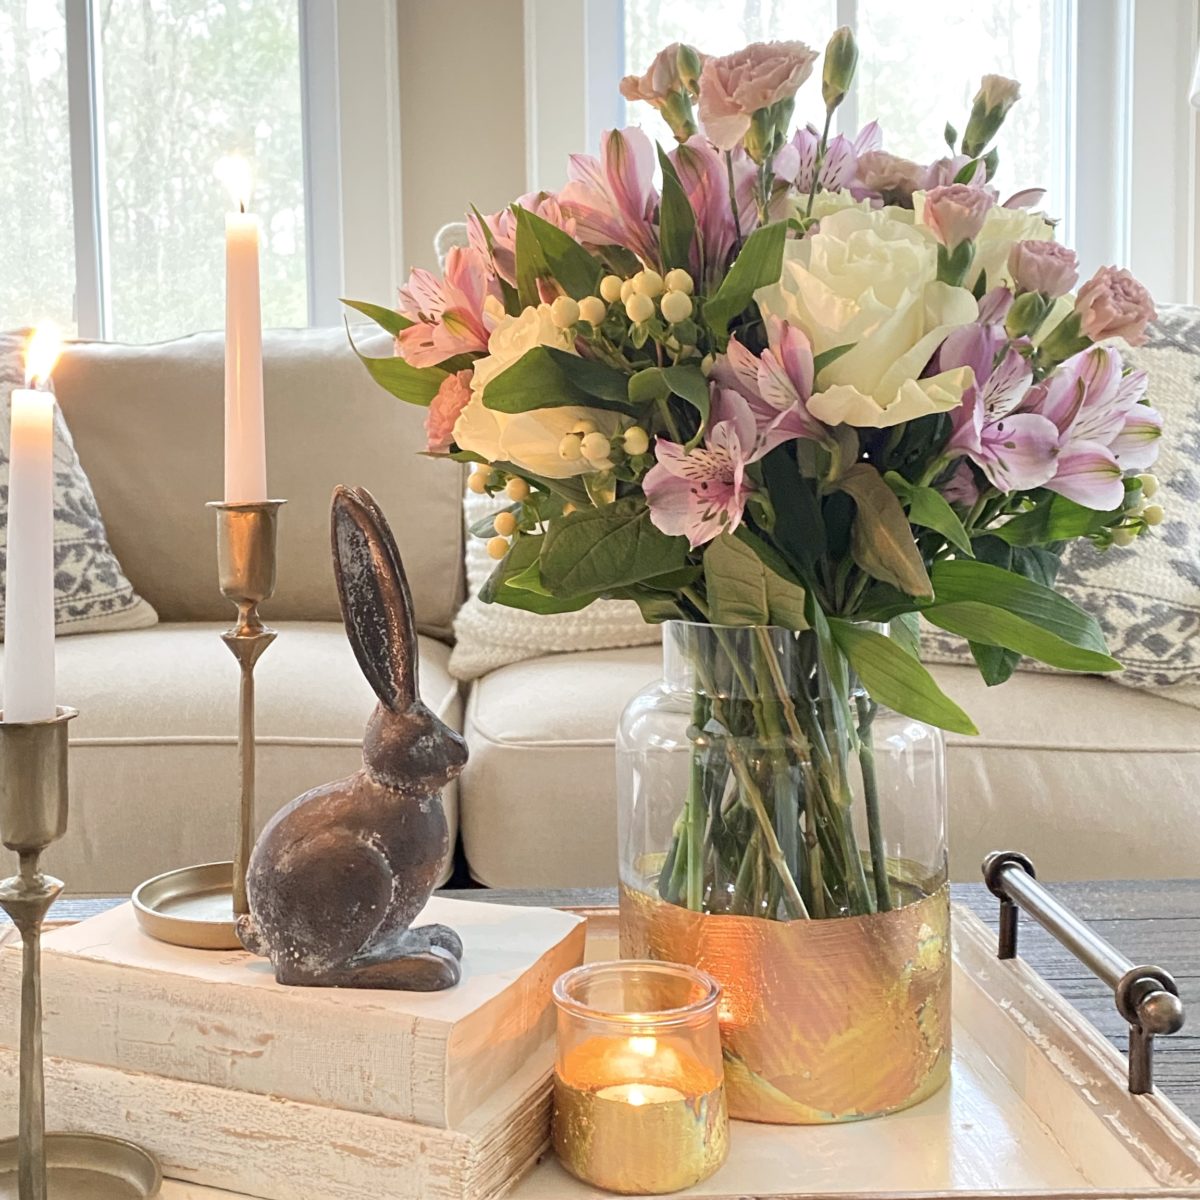 DIY gold leaf vase styled with Spring flowers on a tray with a bunny figurine, books, and candles.